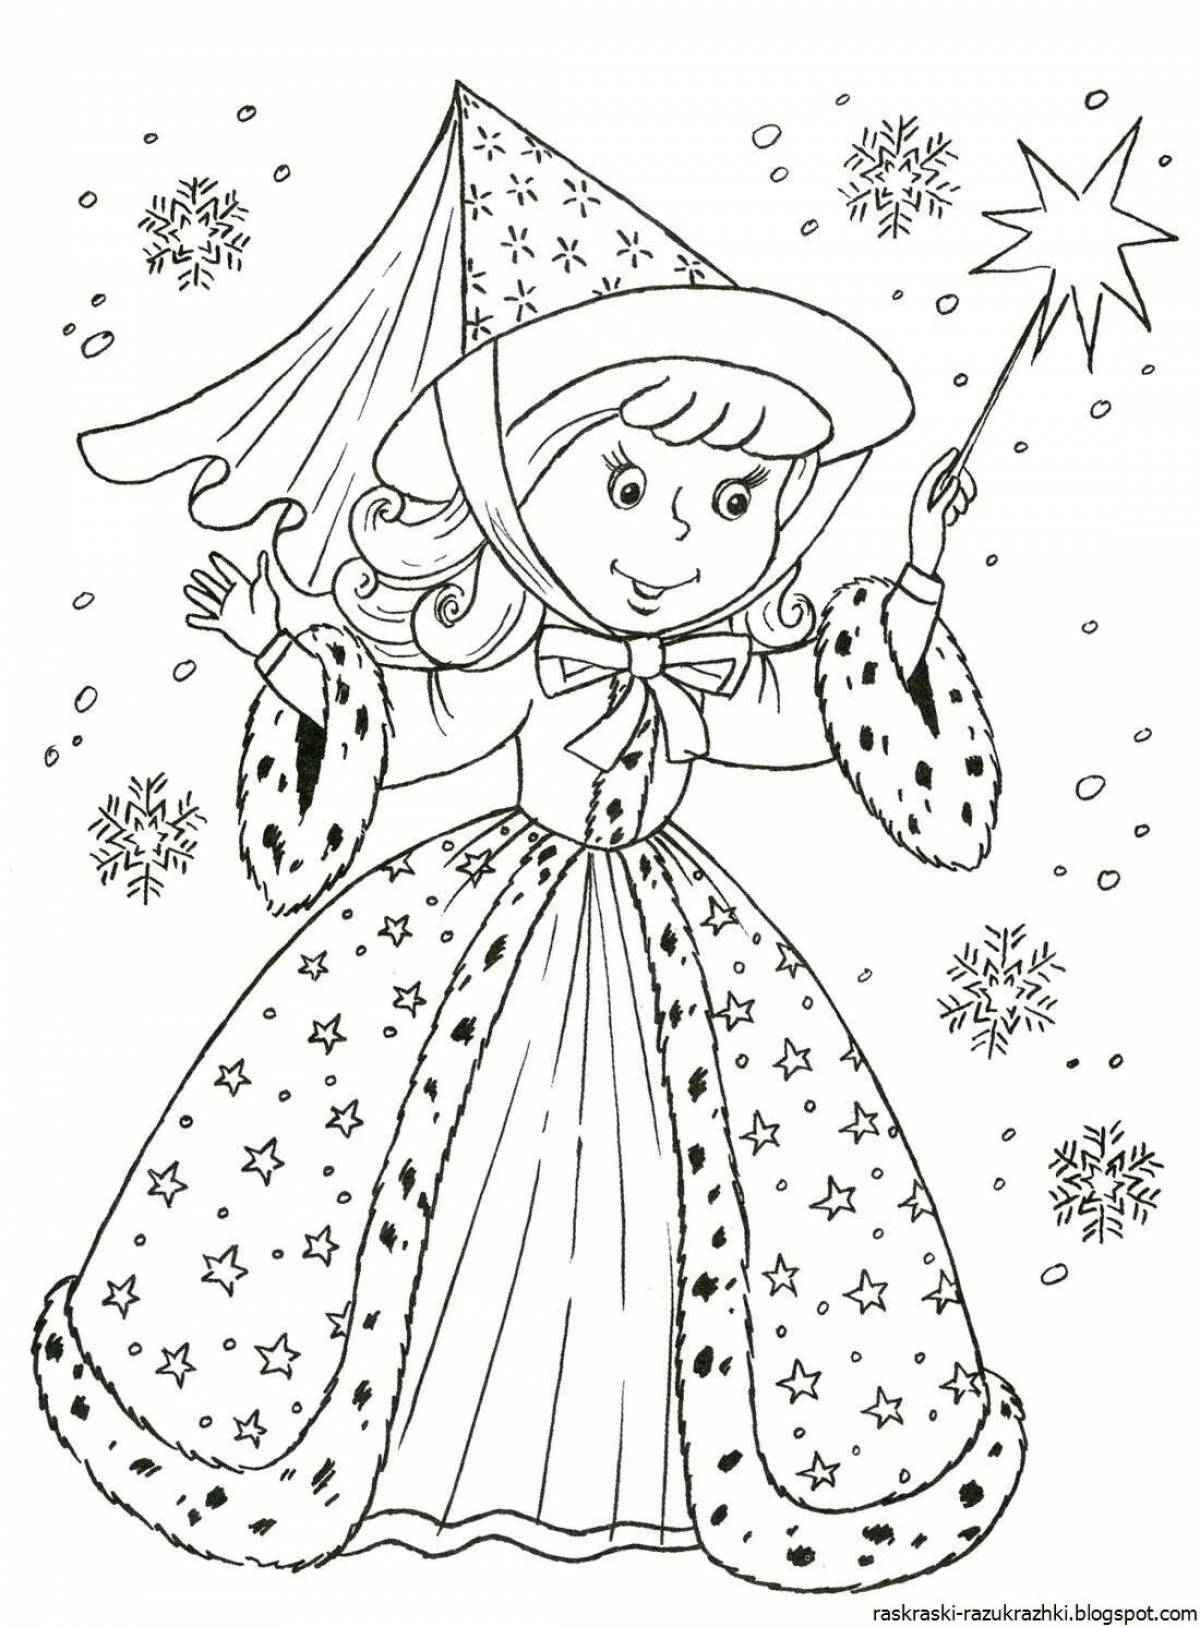 Majestic fairy tale coloring pages for girls